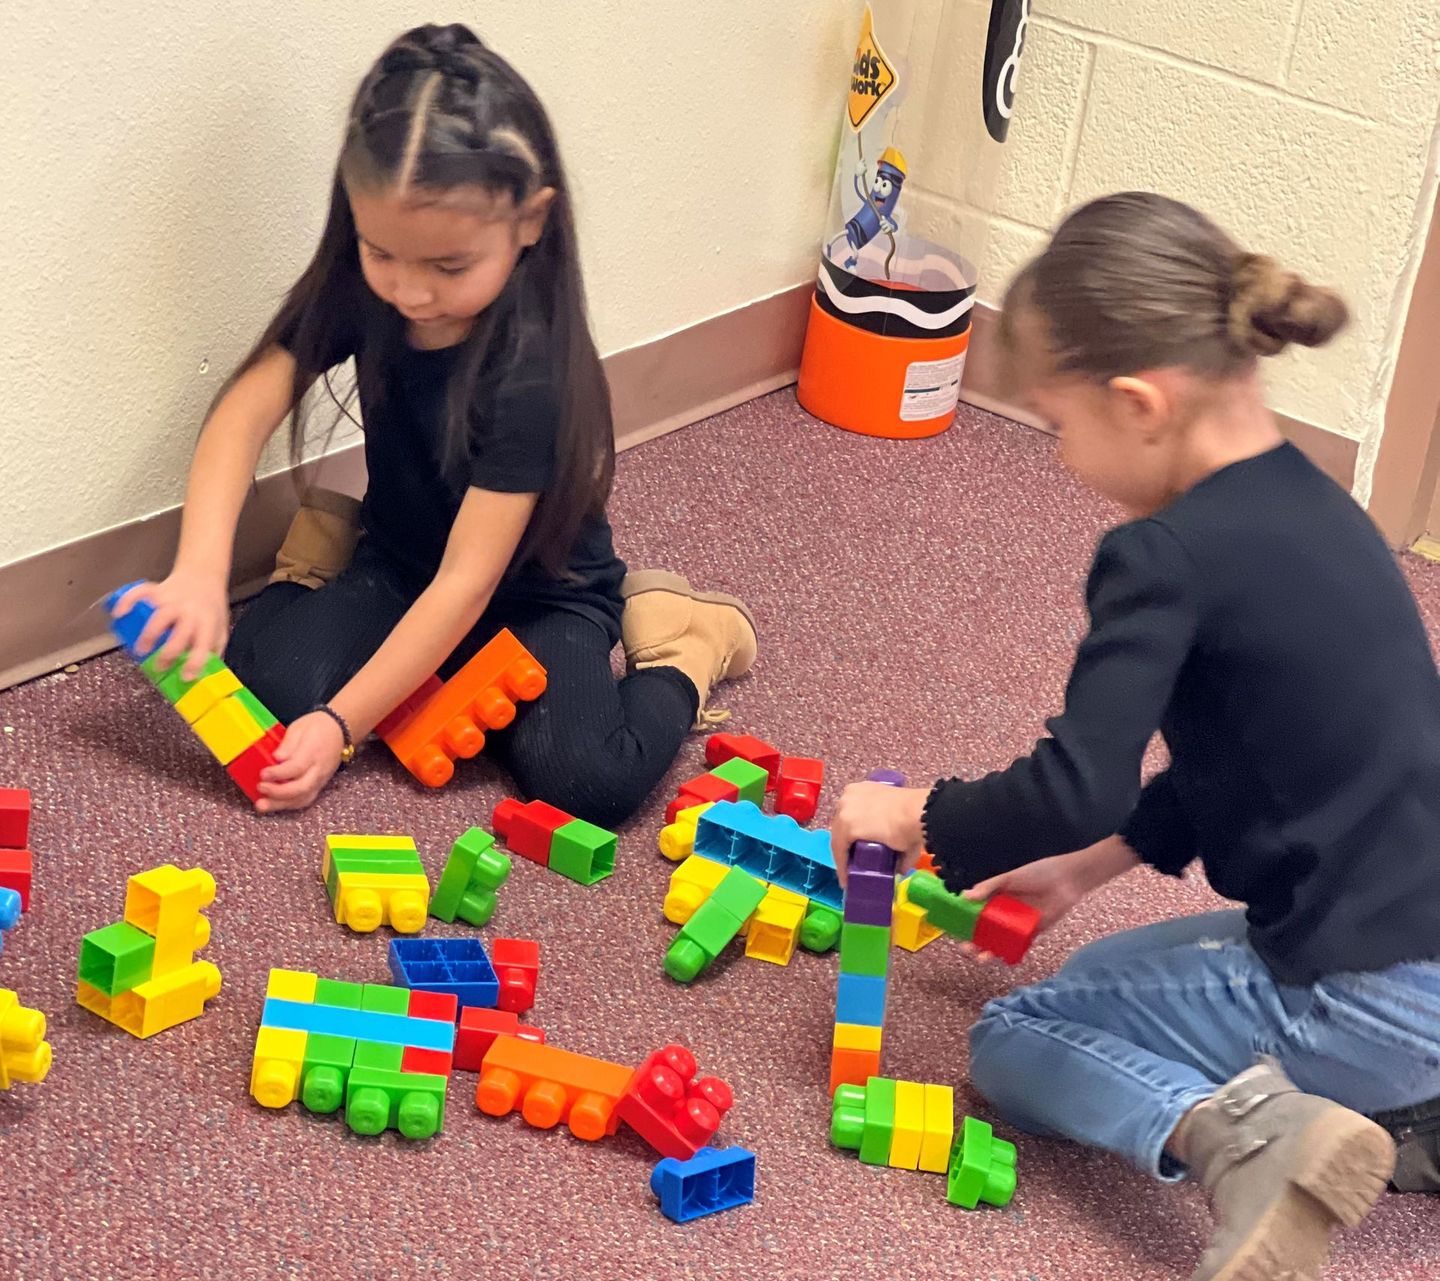 two young girls are playing with lego blocks on the floor